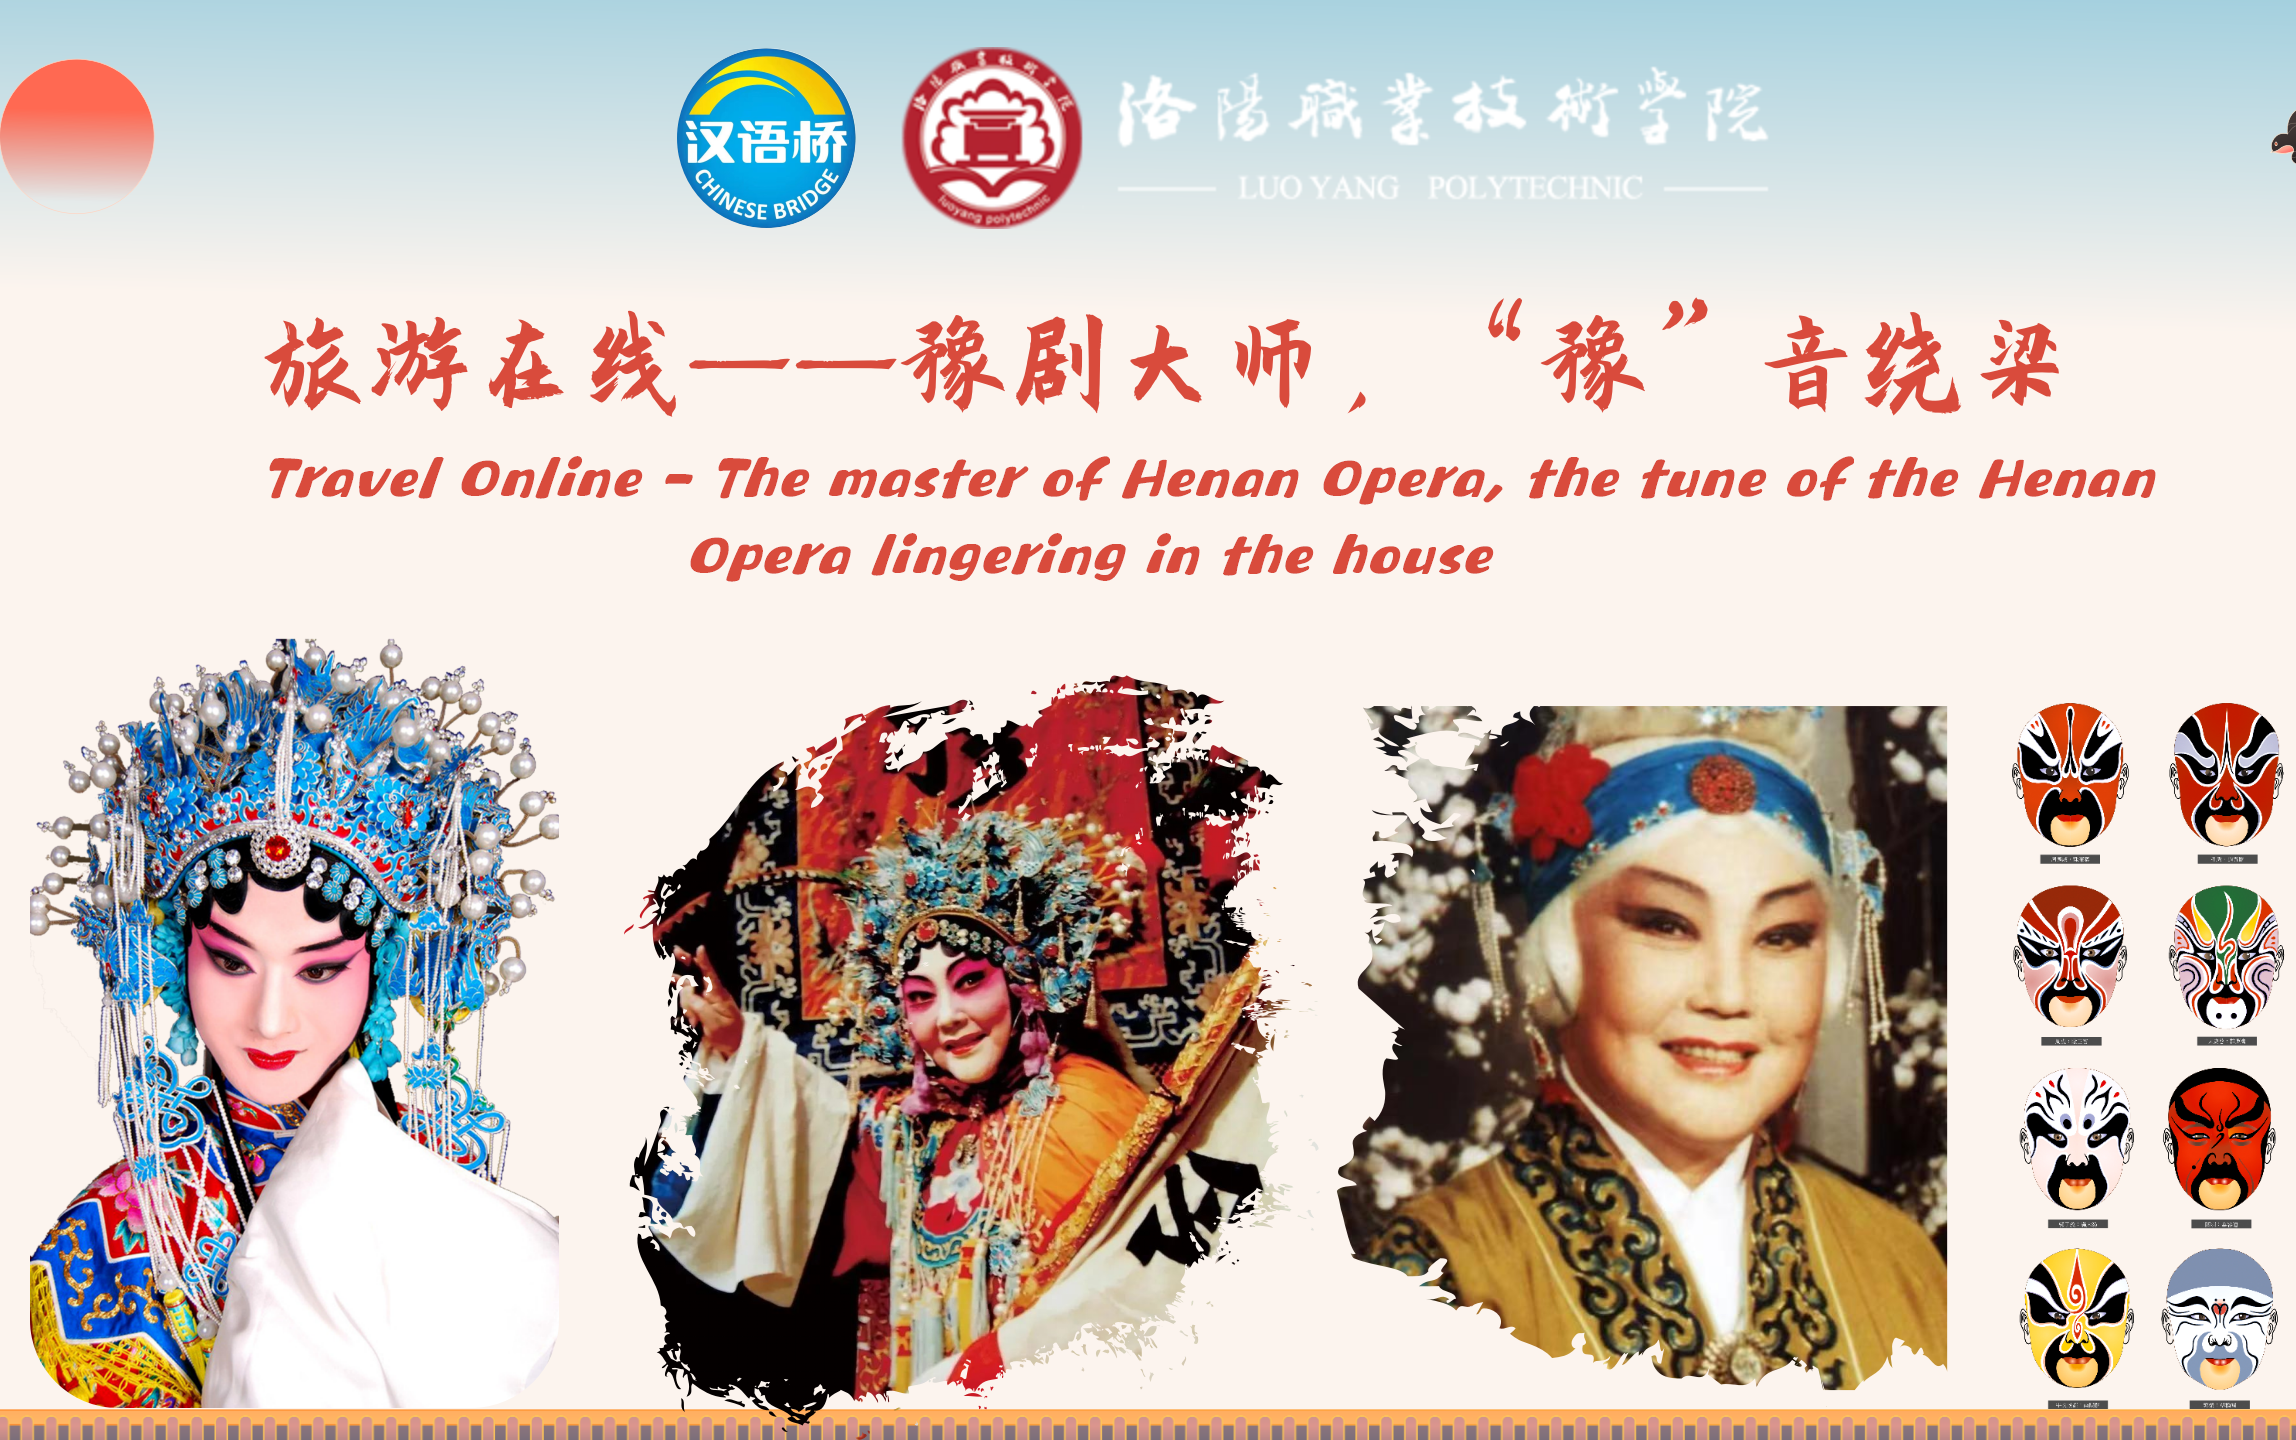 Travel Online - The master of Henan Opera, the tune of the Henan Opera lingering in the house